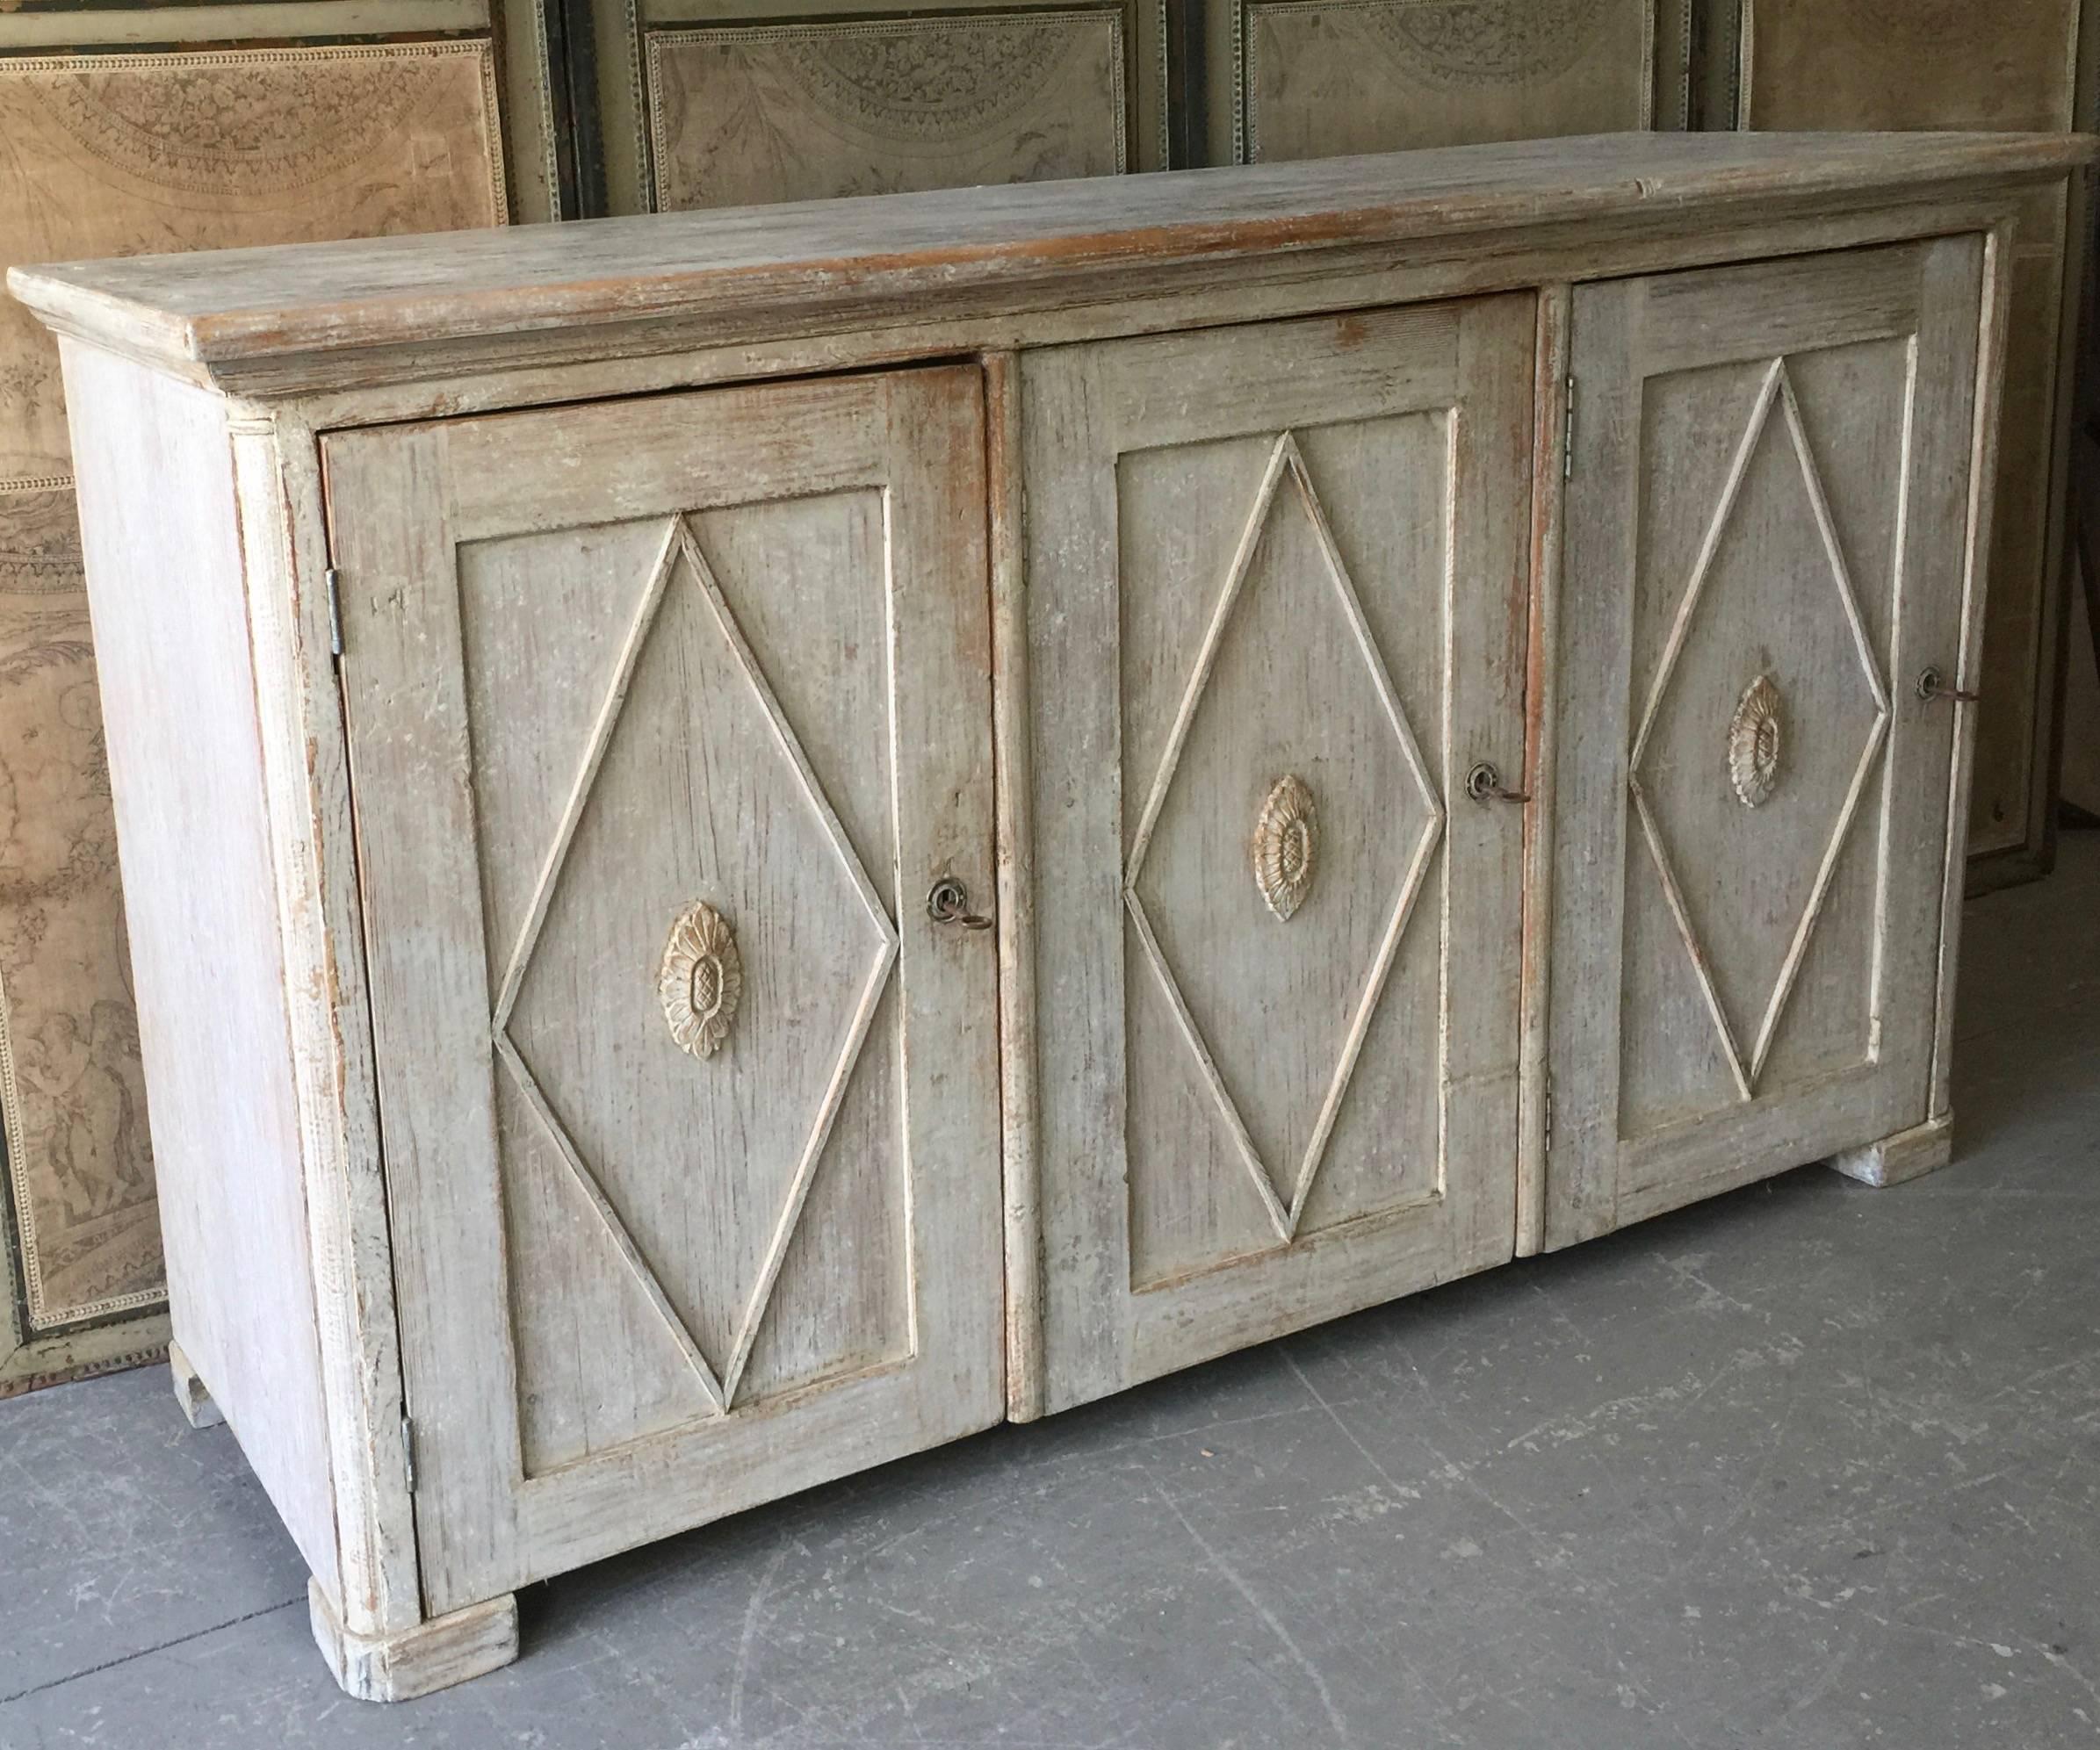 Early19th century Swedish Gustavian period sideboard in Classic Gustavian Style with beautiful diamond shaped raised panel doors.
Wonderful find! 
circa, 1800-1810 Värmland, Sweden.
Here are few examples surprising pieces and objects, authentic,